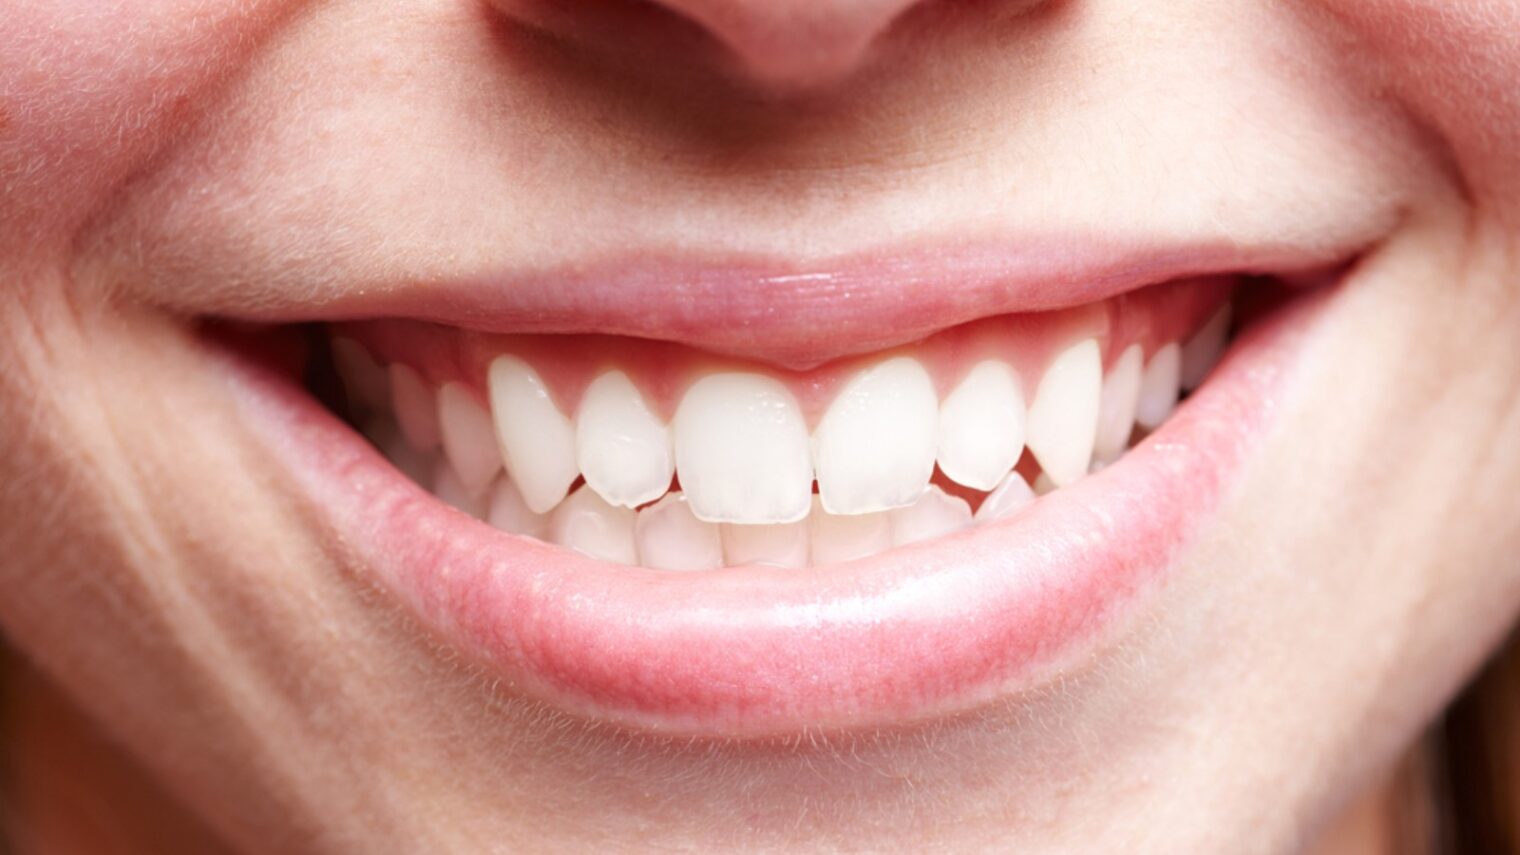 Good oral hygiene is important to avoid gum infection. Photo by Robert Kneschke/Shutterstock.com